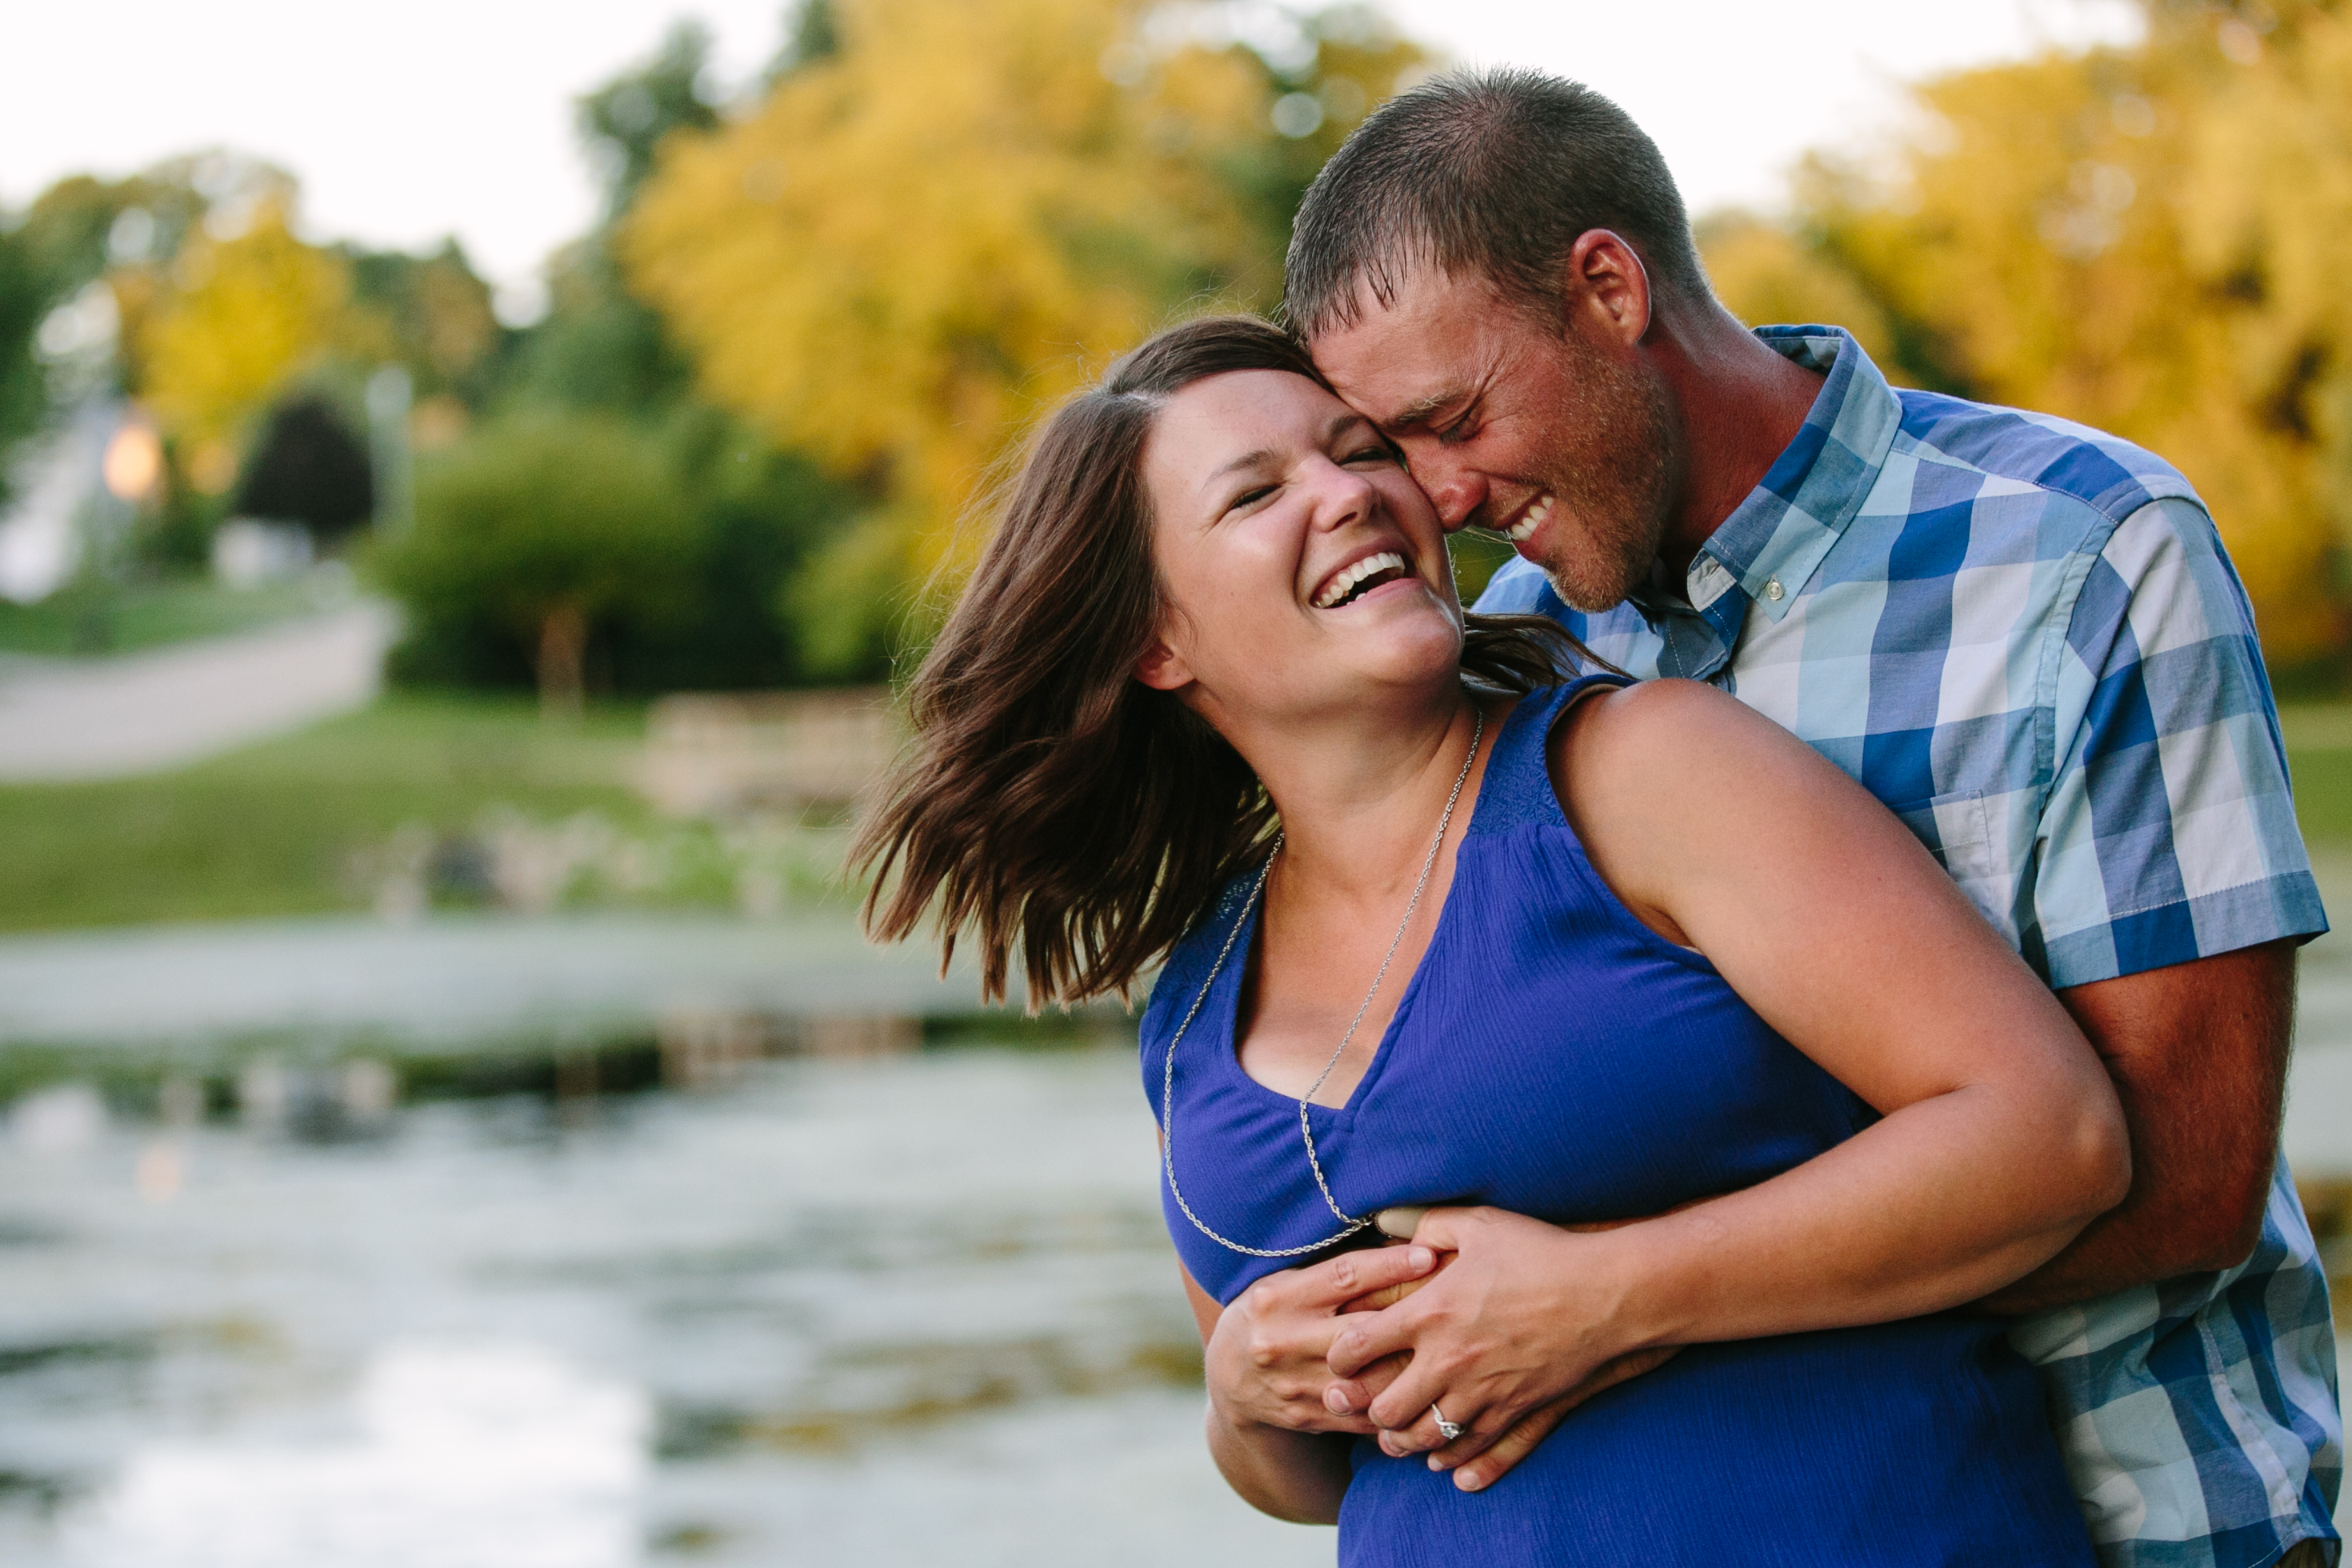 outdoor dubuque engagement session by catherine furlin photography, couple having fun